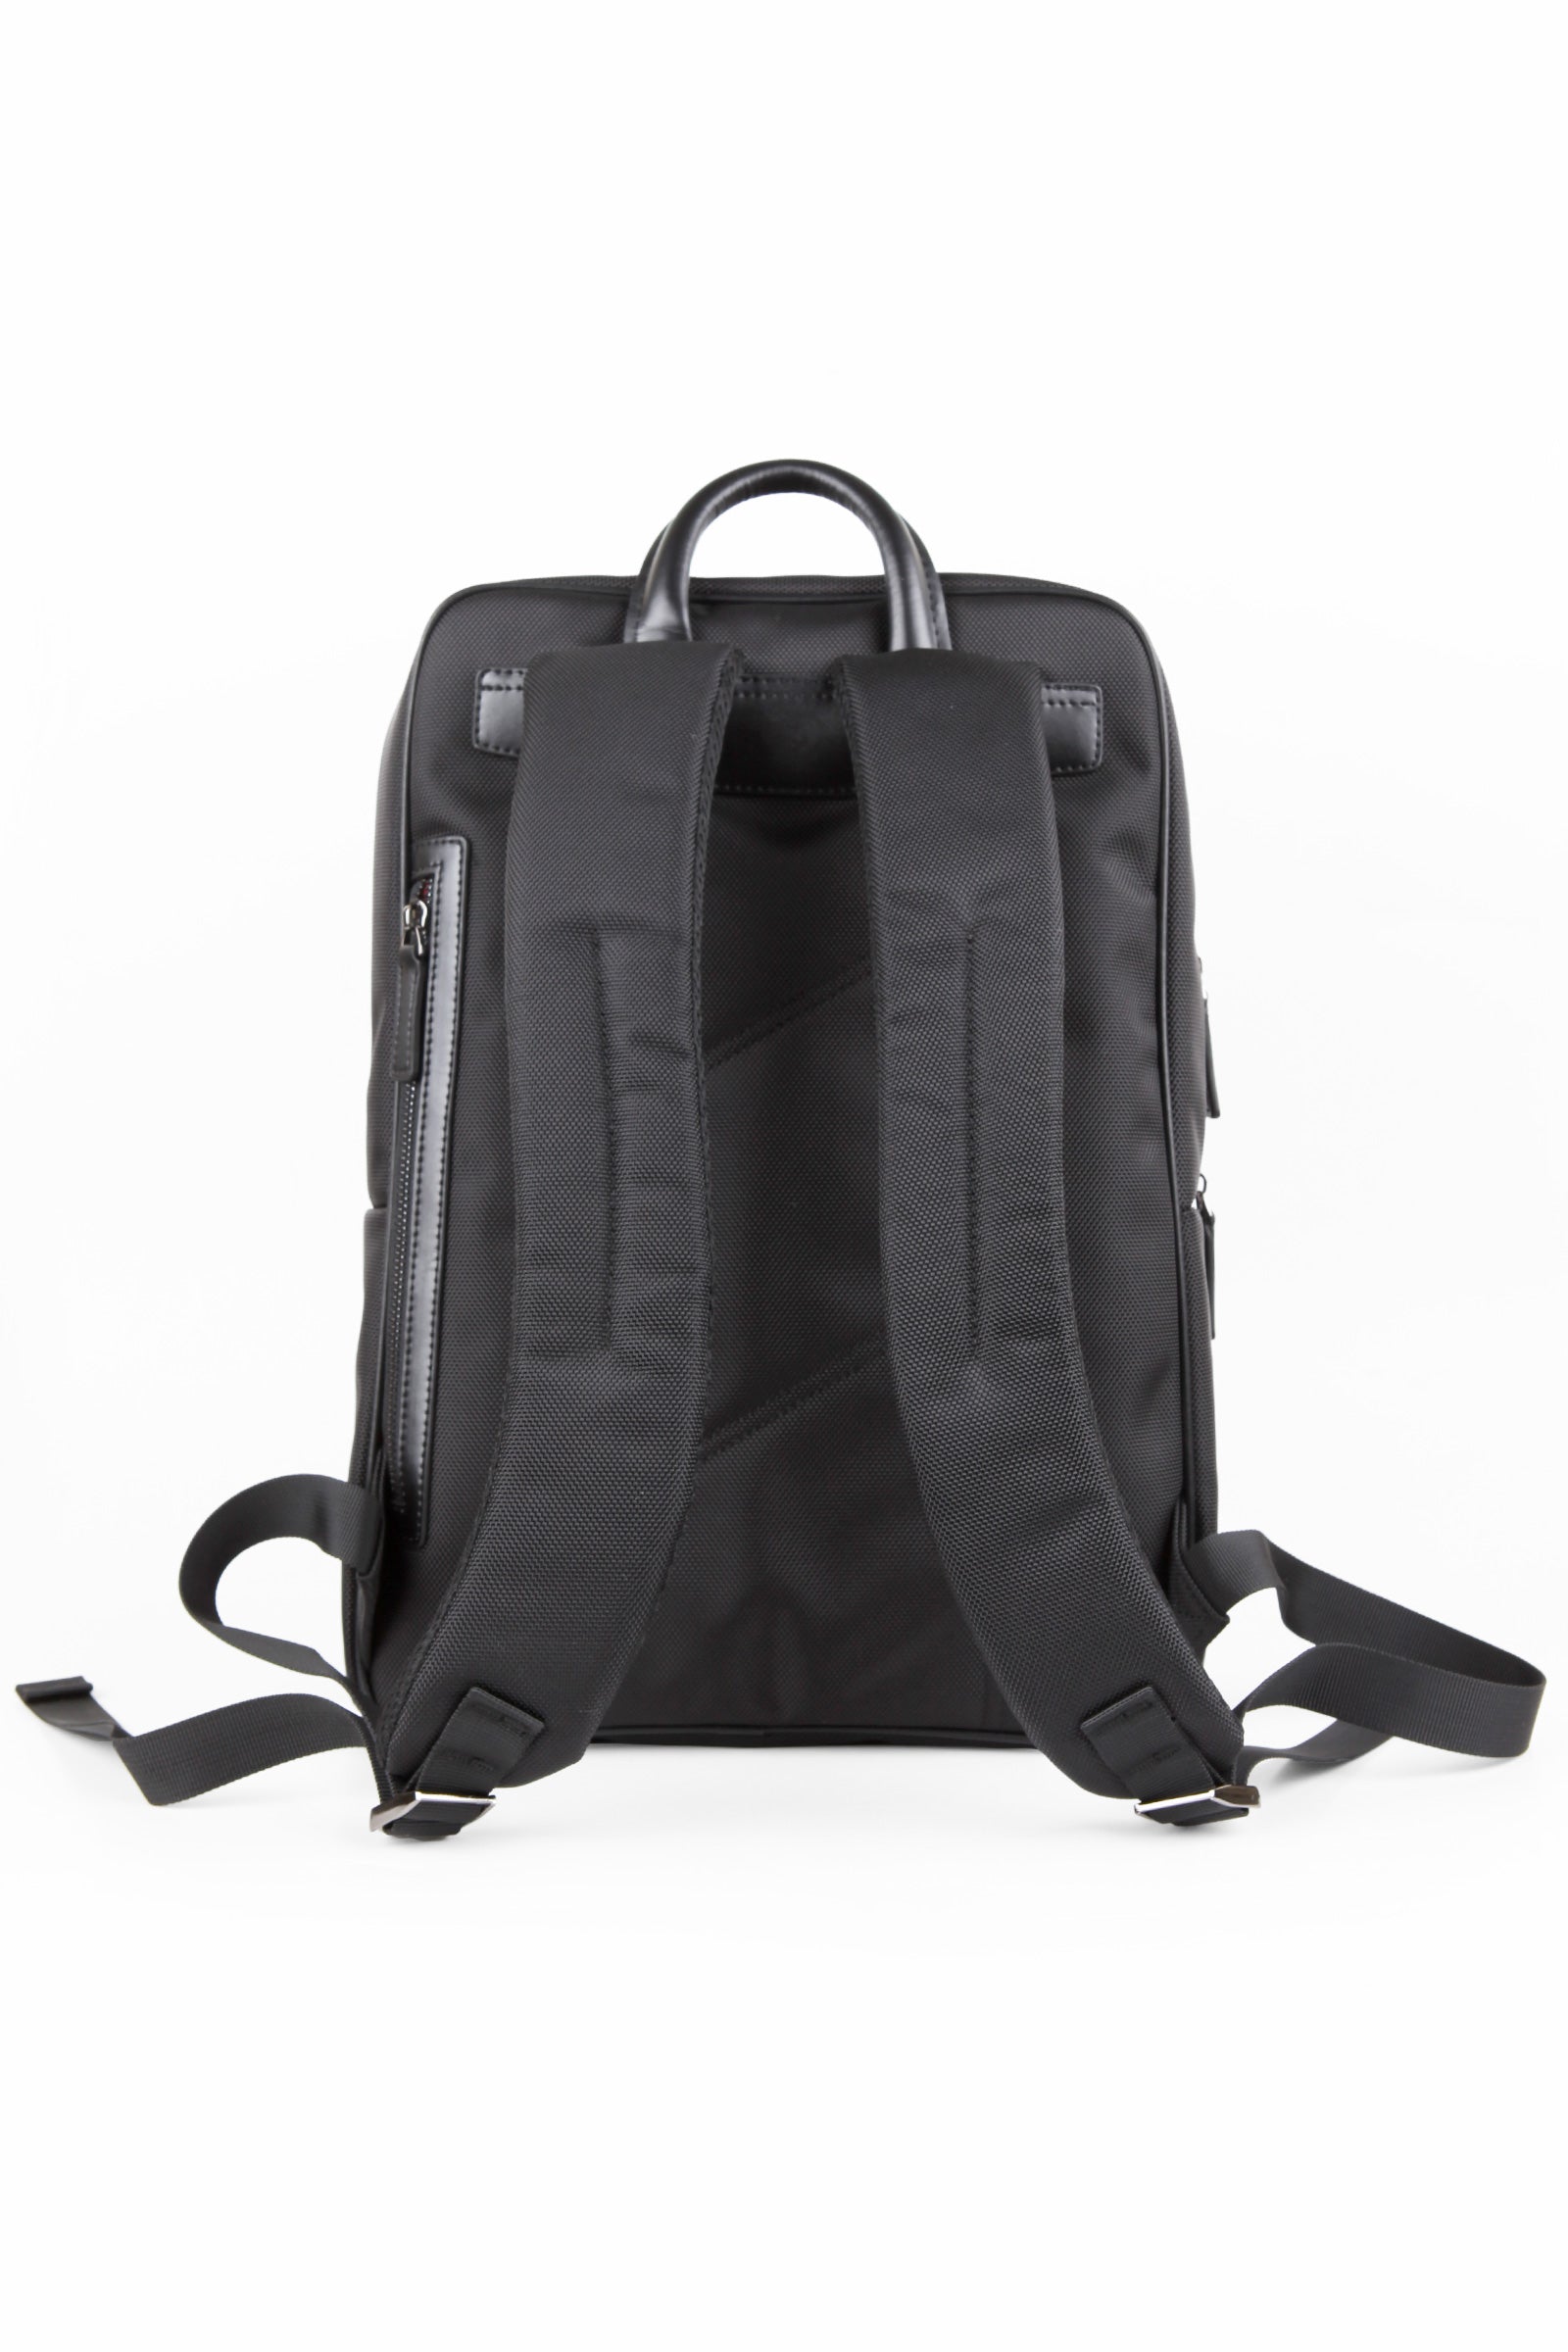 Andrew Smith Tas Backpack Pria A0008T01A